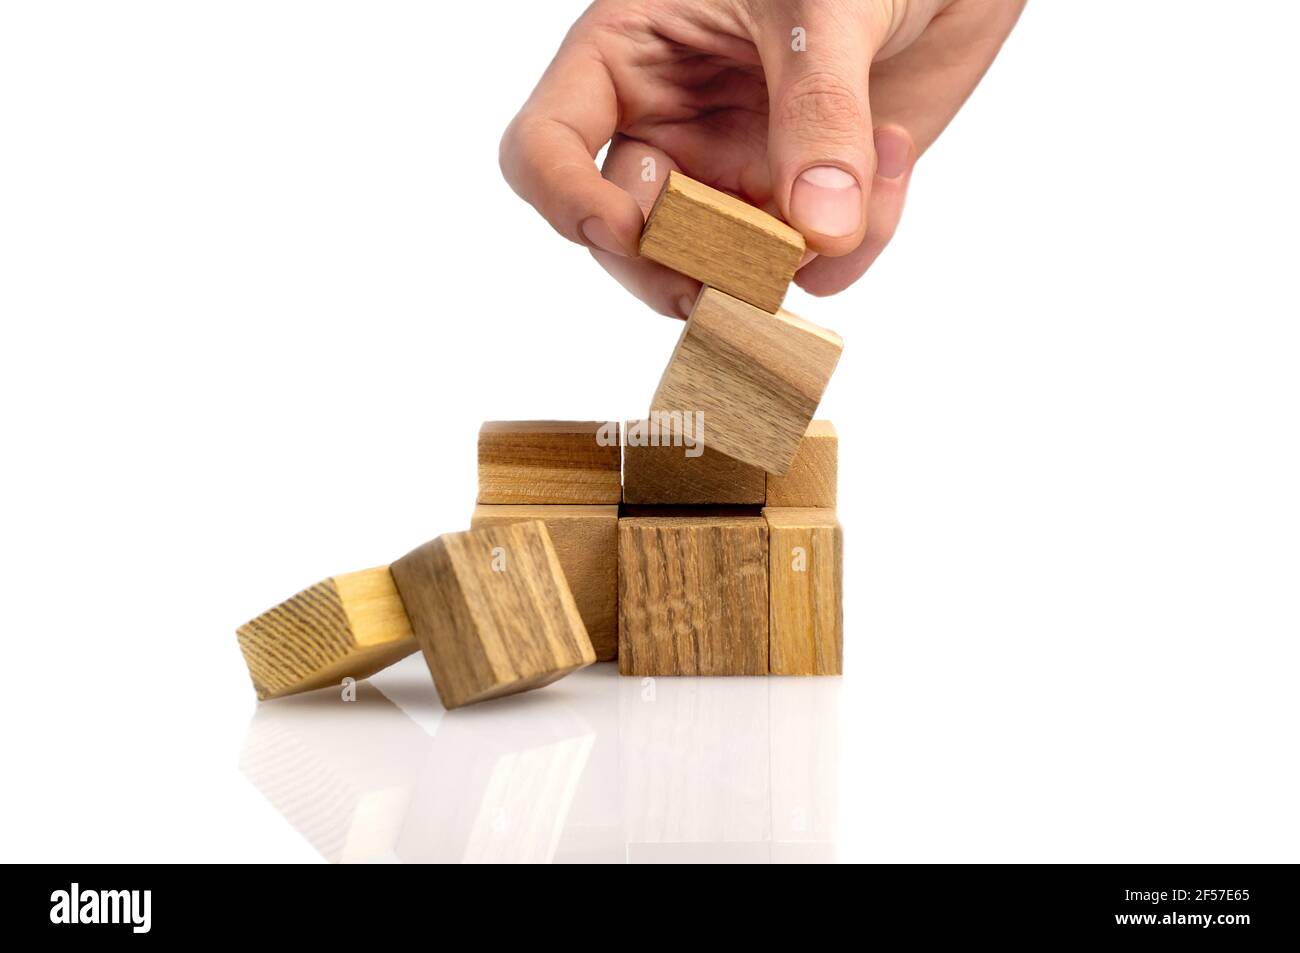 man's hand adds the last missing piece of the wooden puzzle in place. Business success concept. Layout for presentation. Stock Photo